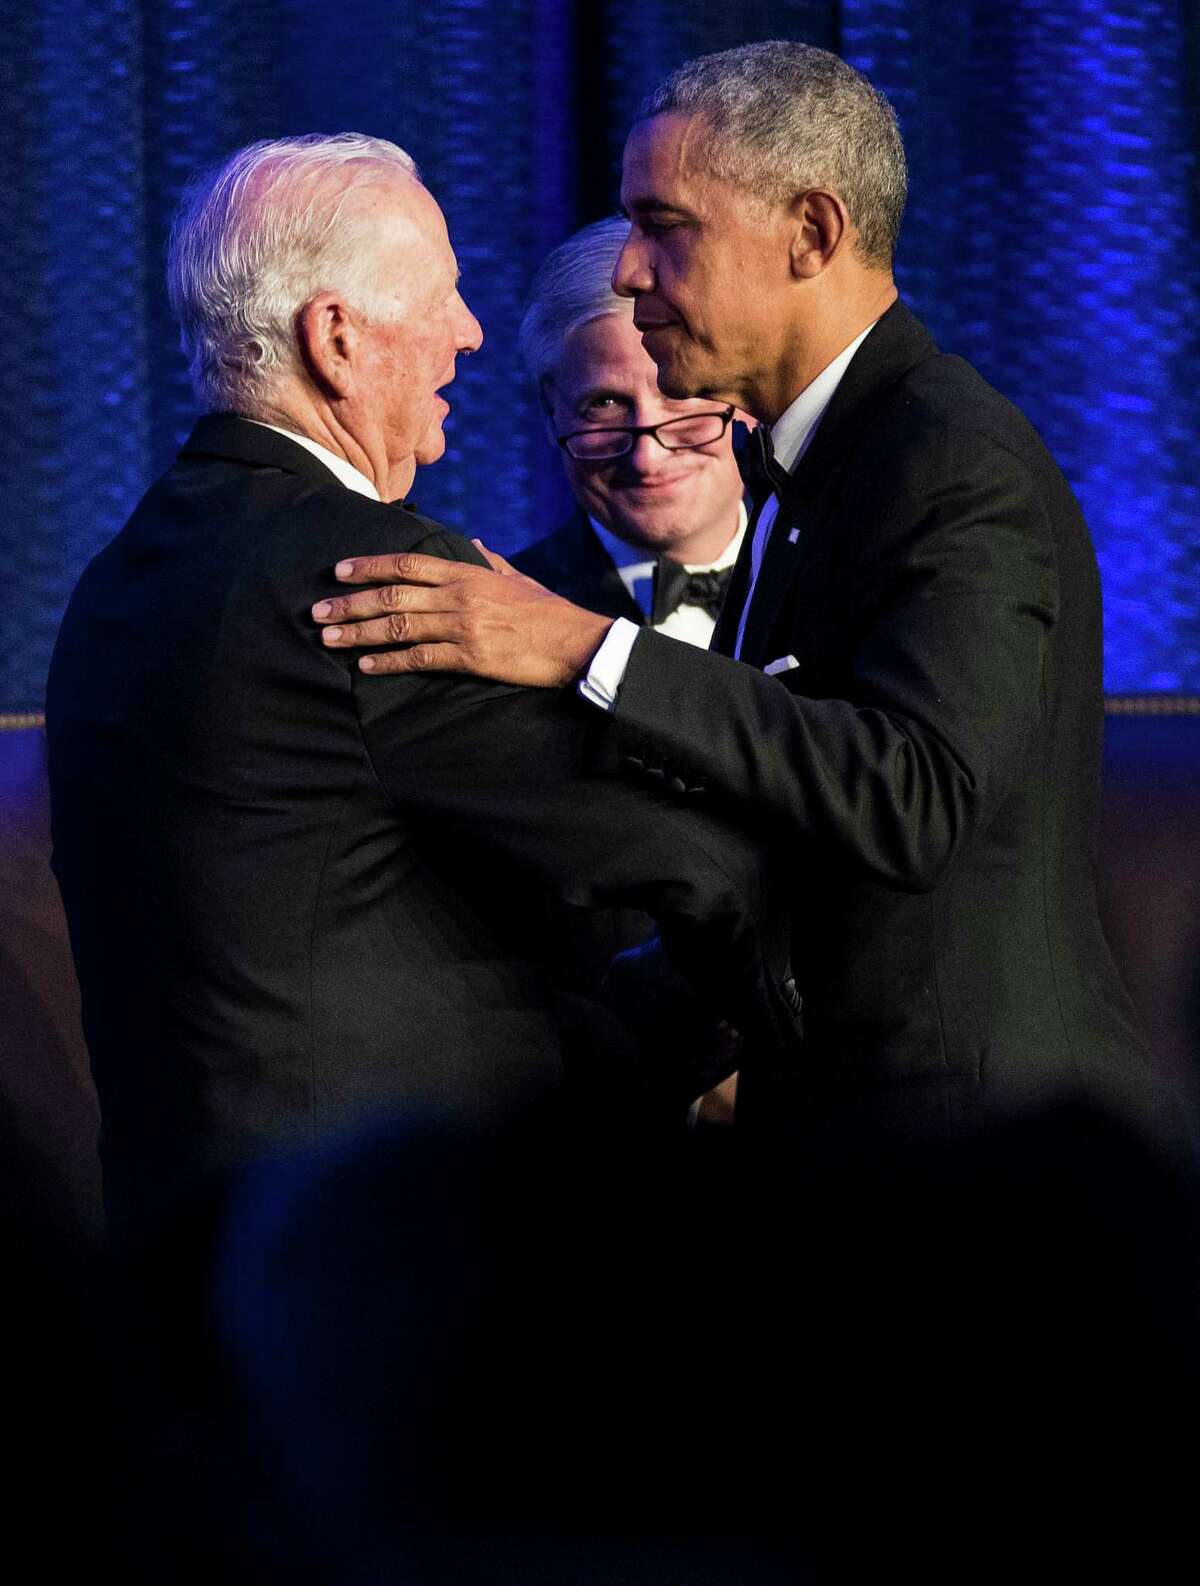 Former Secretary of State James A. Baker III, left, historian Jon Meacham, center, and former President Barack Obama stand and embrace following their conversation during the 25th anniversary gala celebration for Rice University’s Baker Institute for Public Policy on Tuesday, Nov. 27, 2018, in Houston.